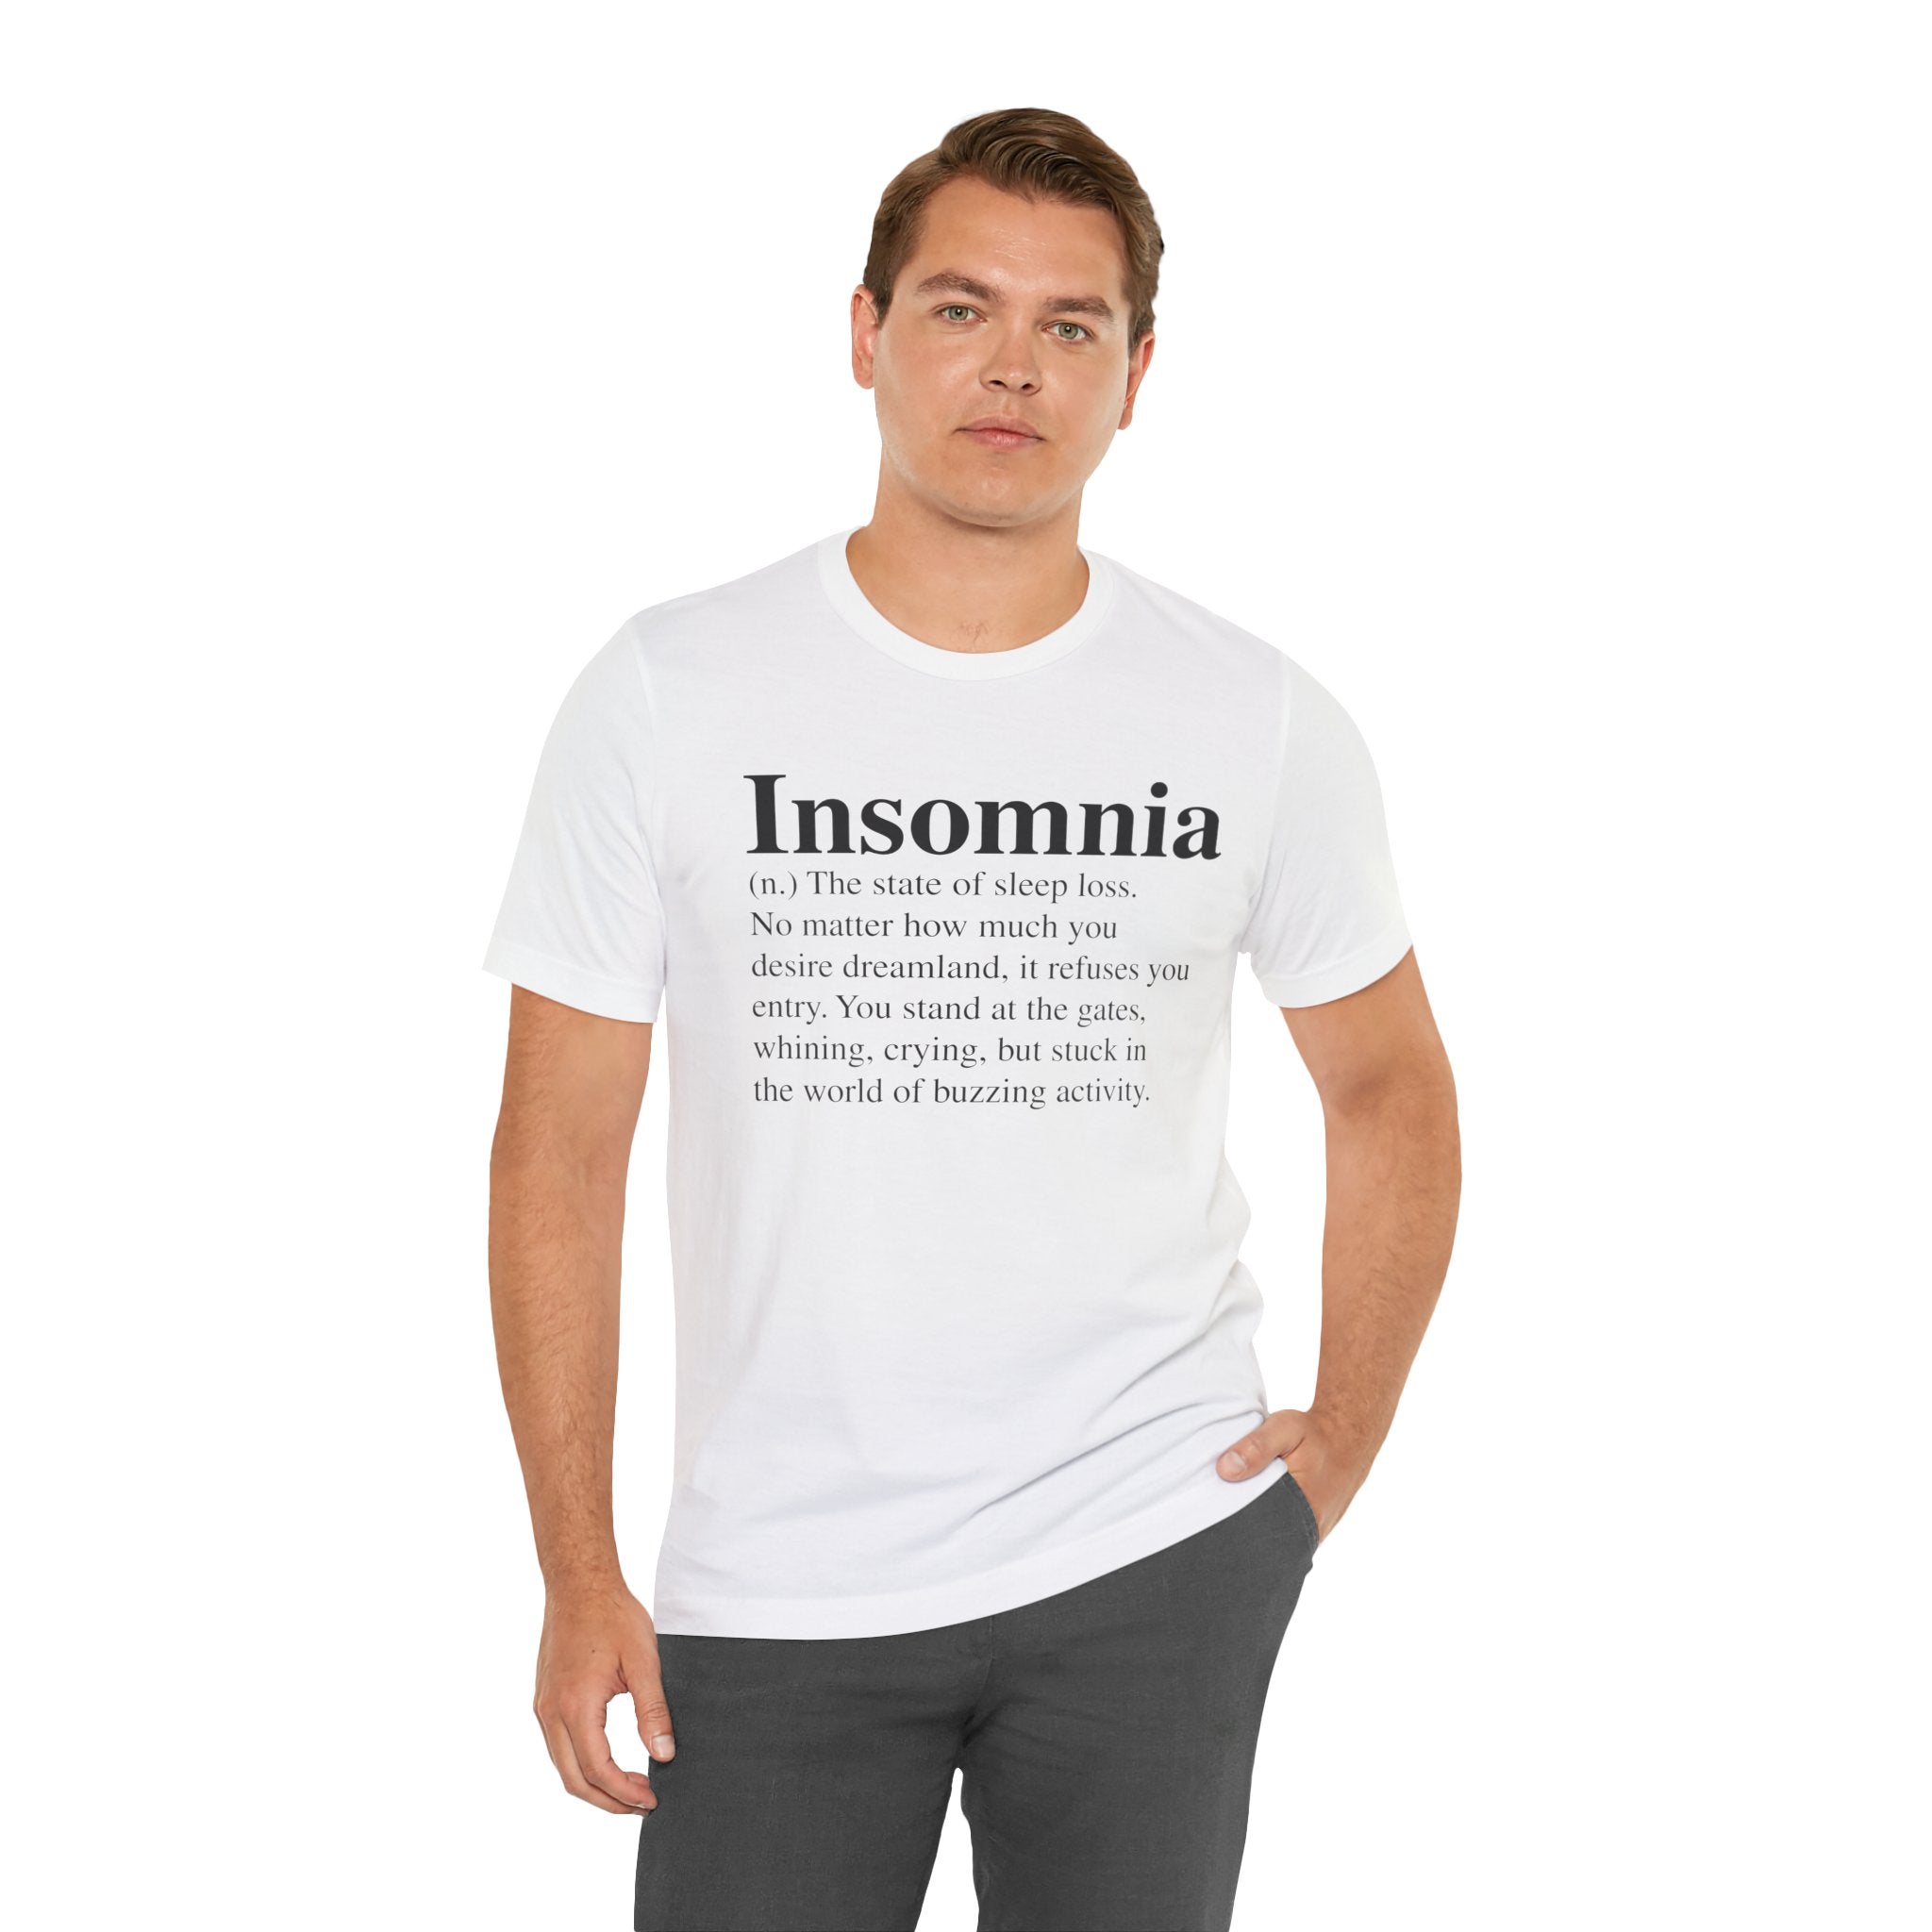 Man in an Insomnia T-Shirt with the word "Insomnia" and its definition quality printed on the front, standing against a plain background.